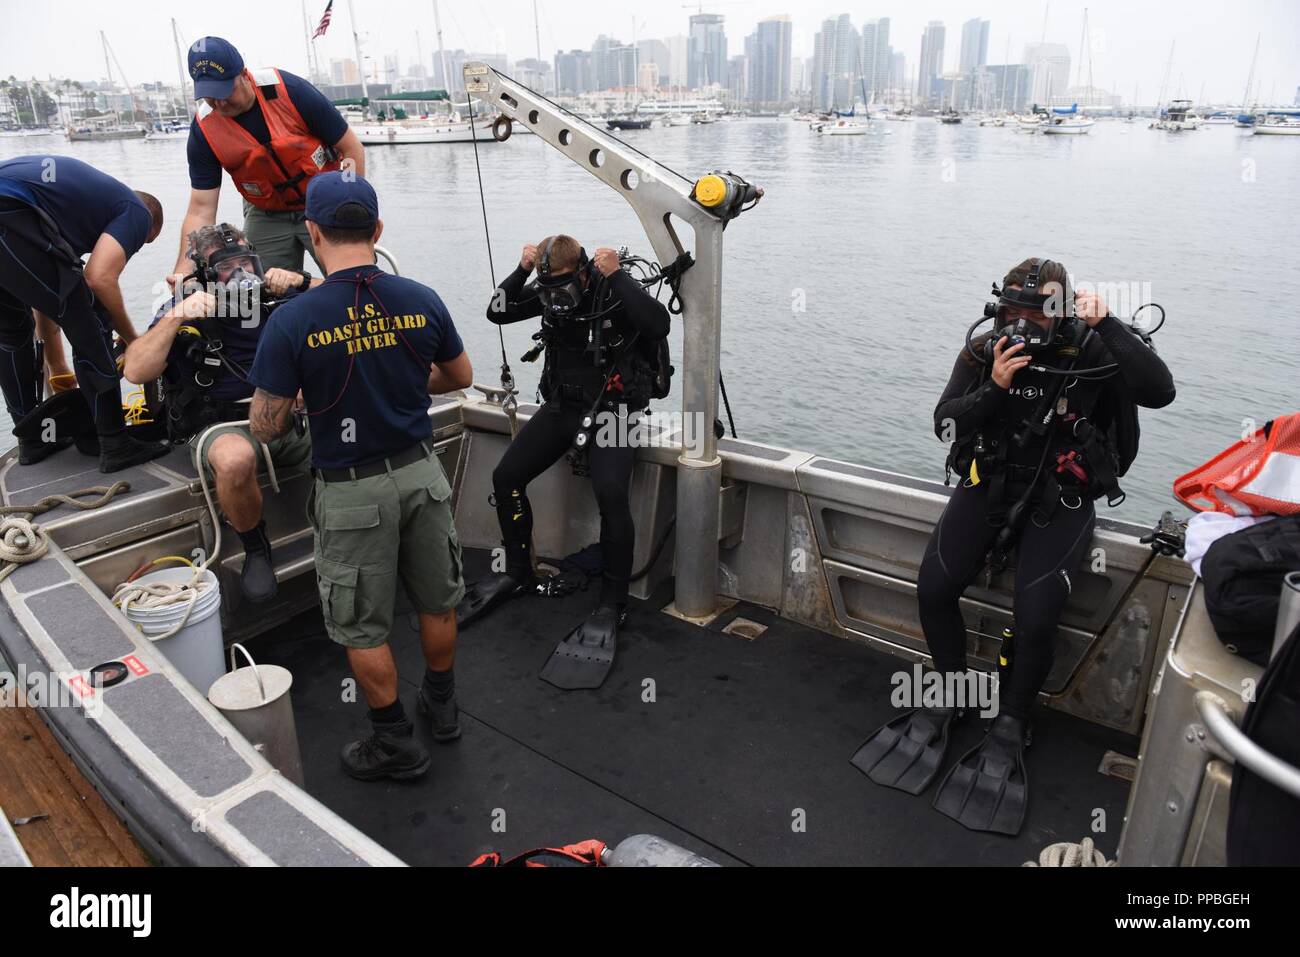 Divers from the Coast Guard Regional Dive Locker West, Maritime Security Response Team West, prepare to enter the water along North Harbor Drive, San Diego Aug. 25, 2018. The dive team was participating in Operation Clean Sweep 2018, a community cleanup effort along the San Diego Bay. Stock Photo